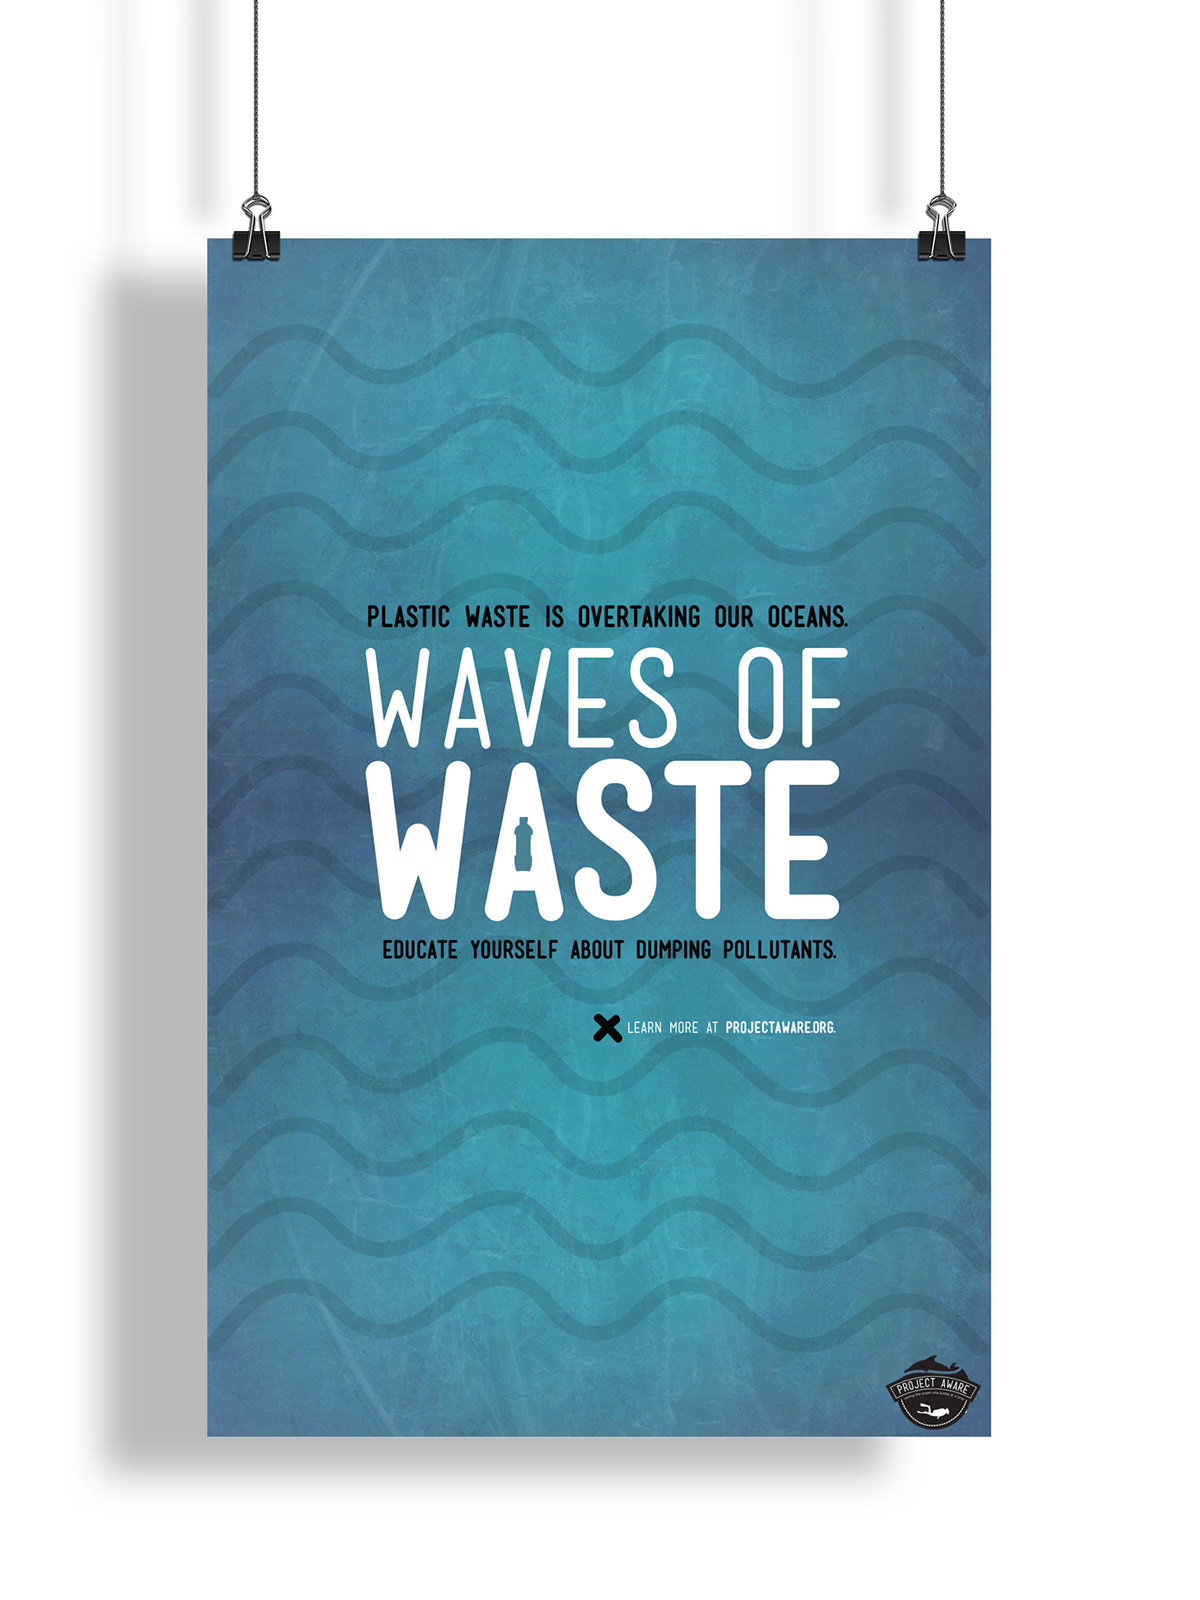 advocacy posters Project AWARE educate Ocean marine life patrick dooley VISC 402 university of kansas fish pollution Plastic Waste recycle Website logo